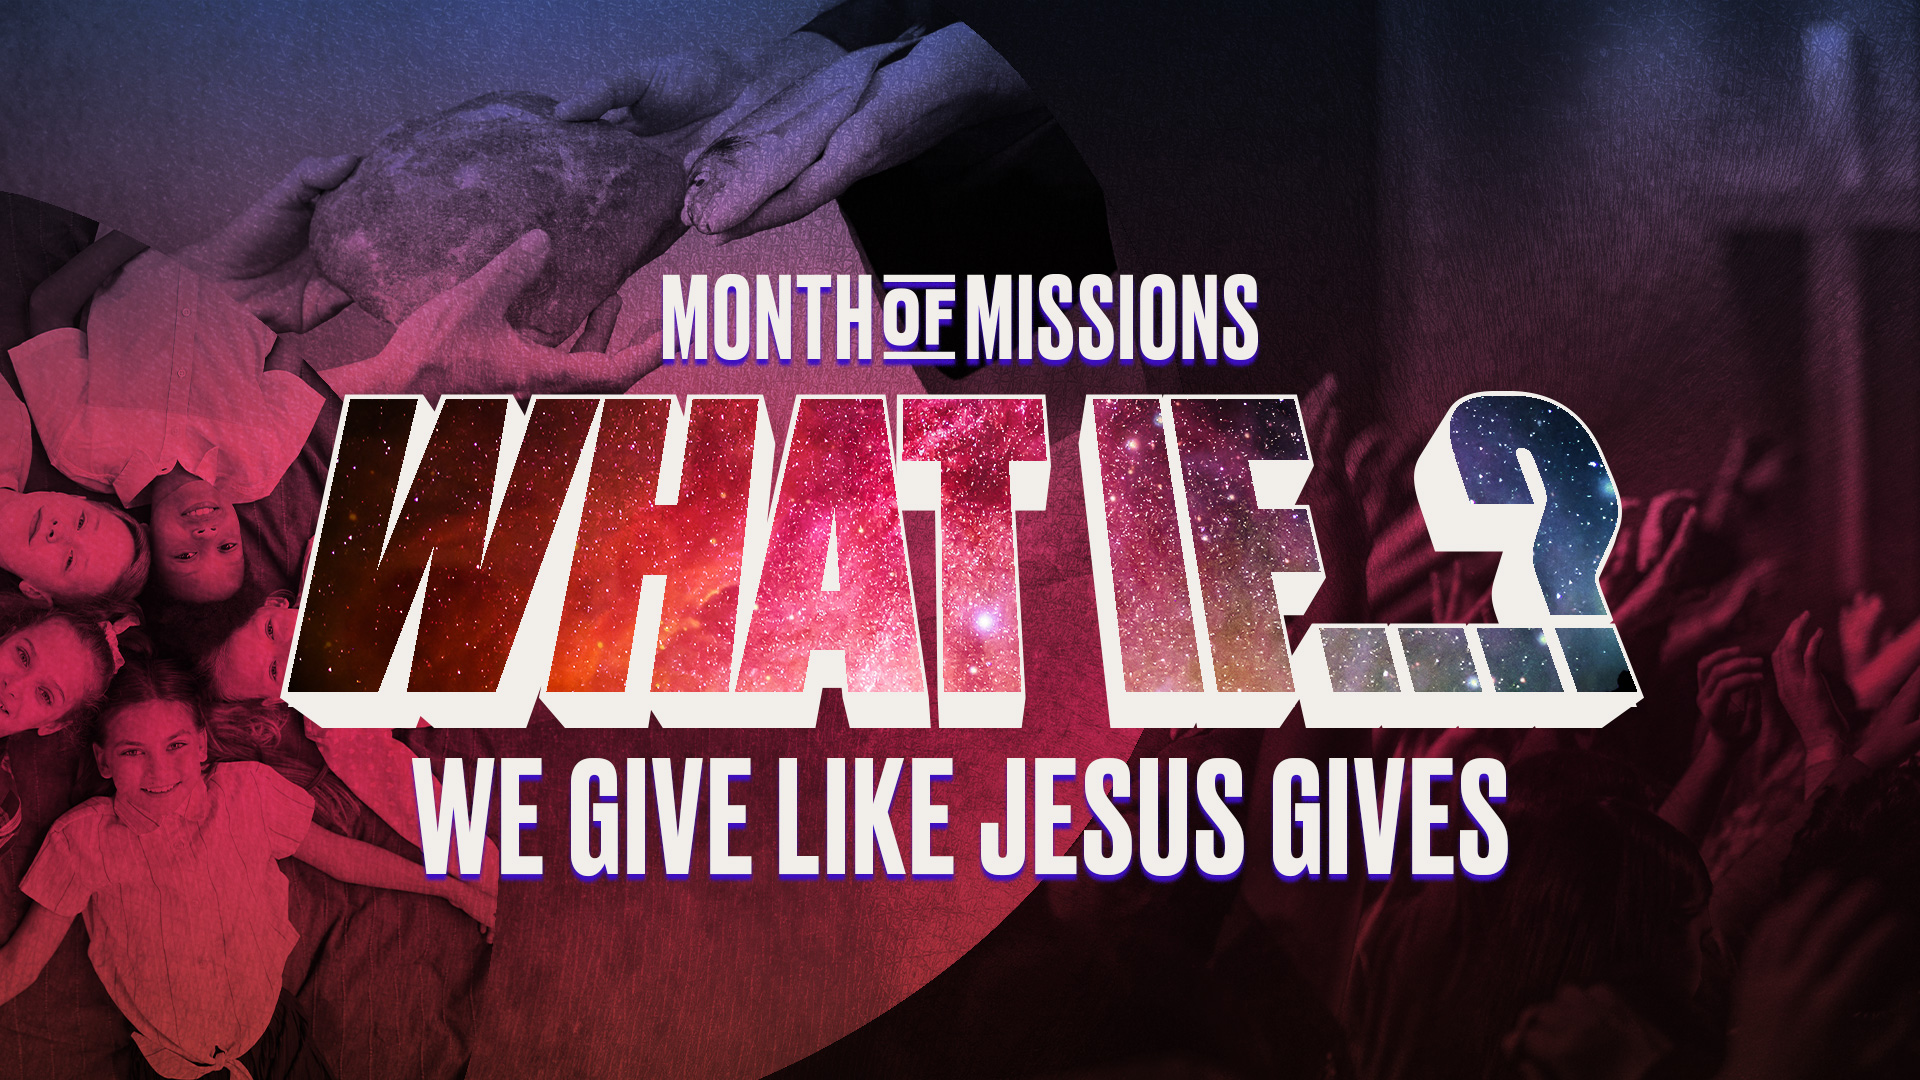 What if we gave like Jesus gave?